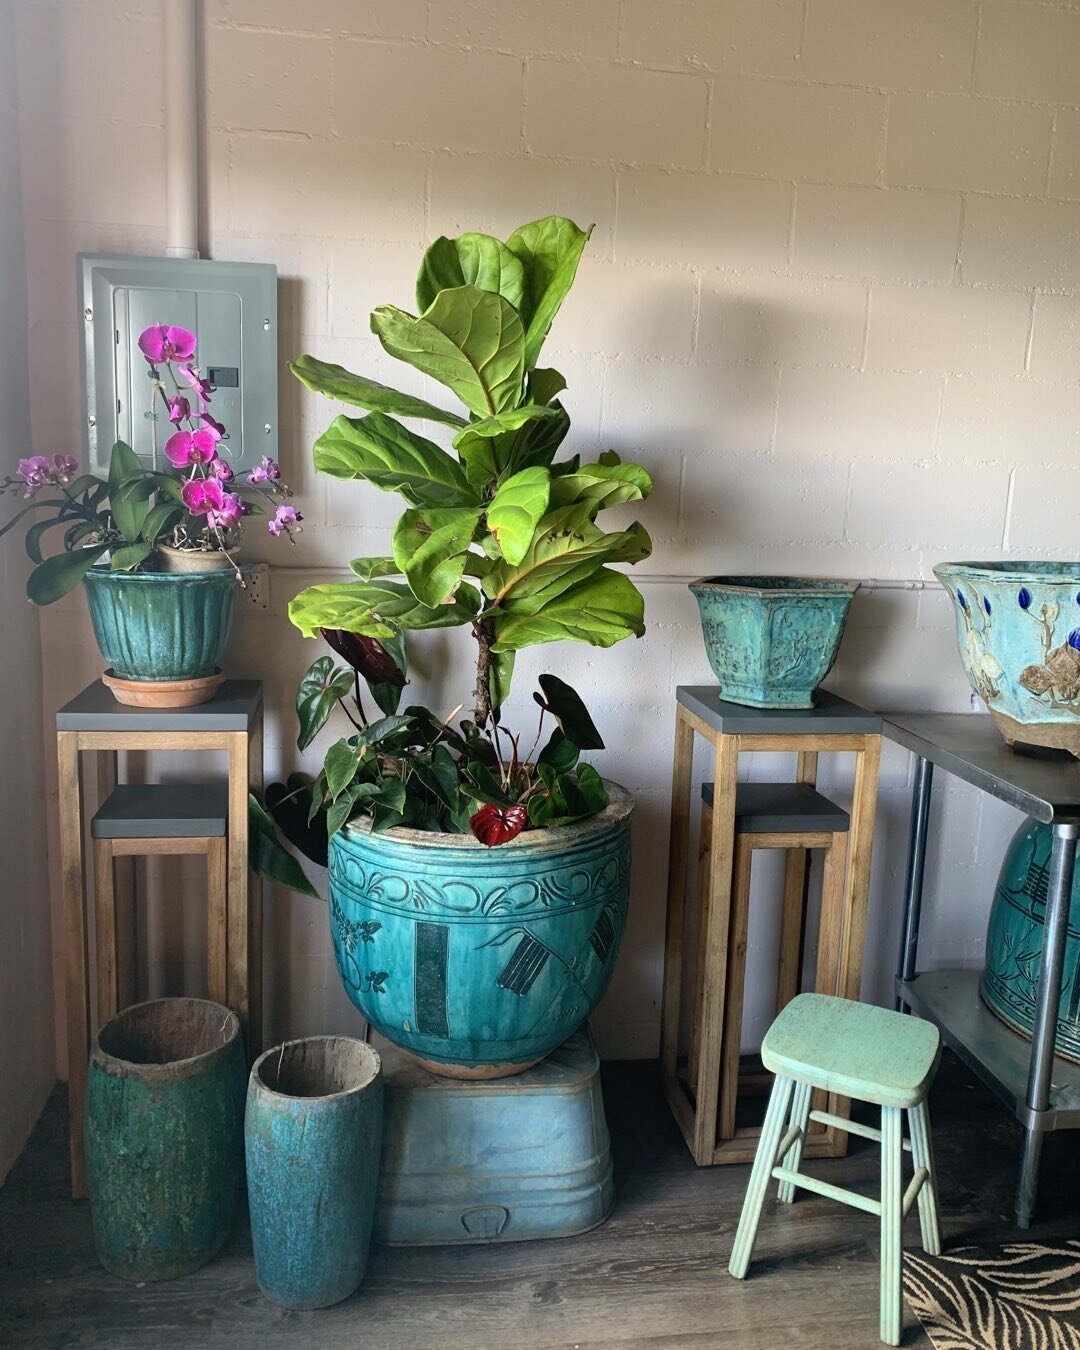 Aloha Monday so grateful for talented Friend Shari Mendelson revamping my design studio , creating a fun , happy , inspiring work area. More beautiful florals on their way. # Mauifloraldesigner #mauiweddingsandevents#Lanaifloraldesigner#welcome back 